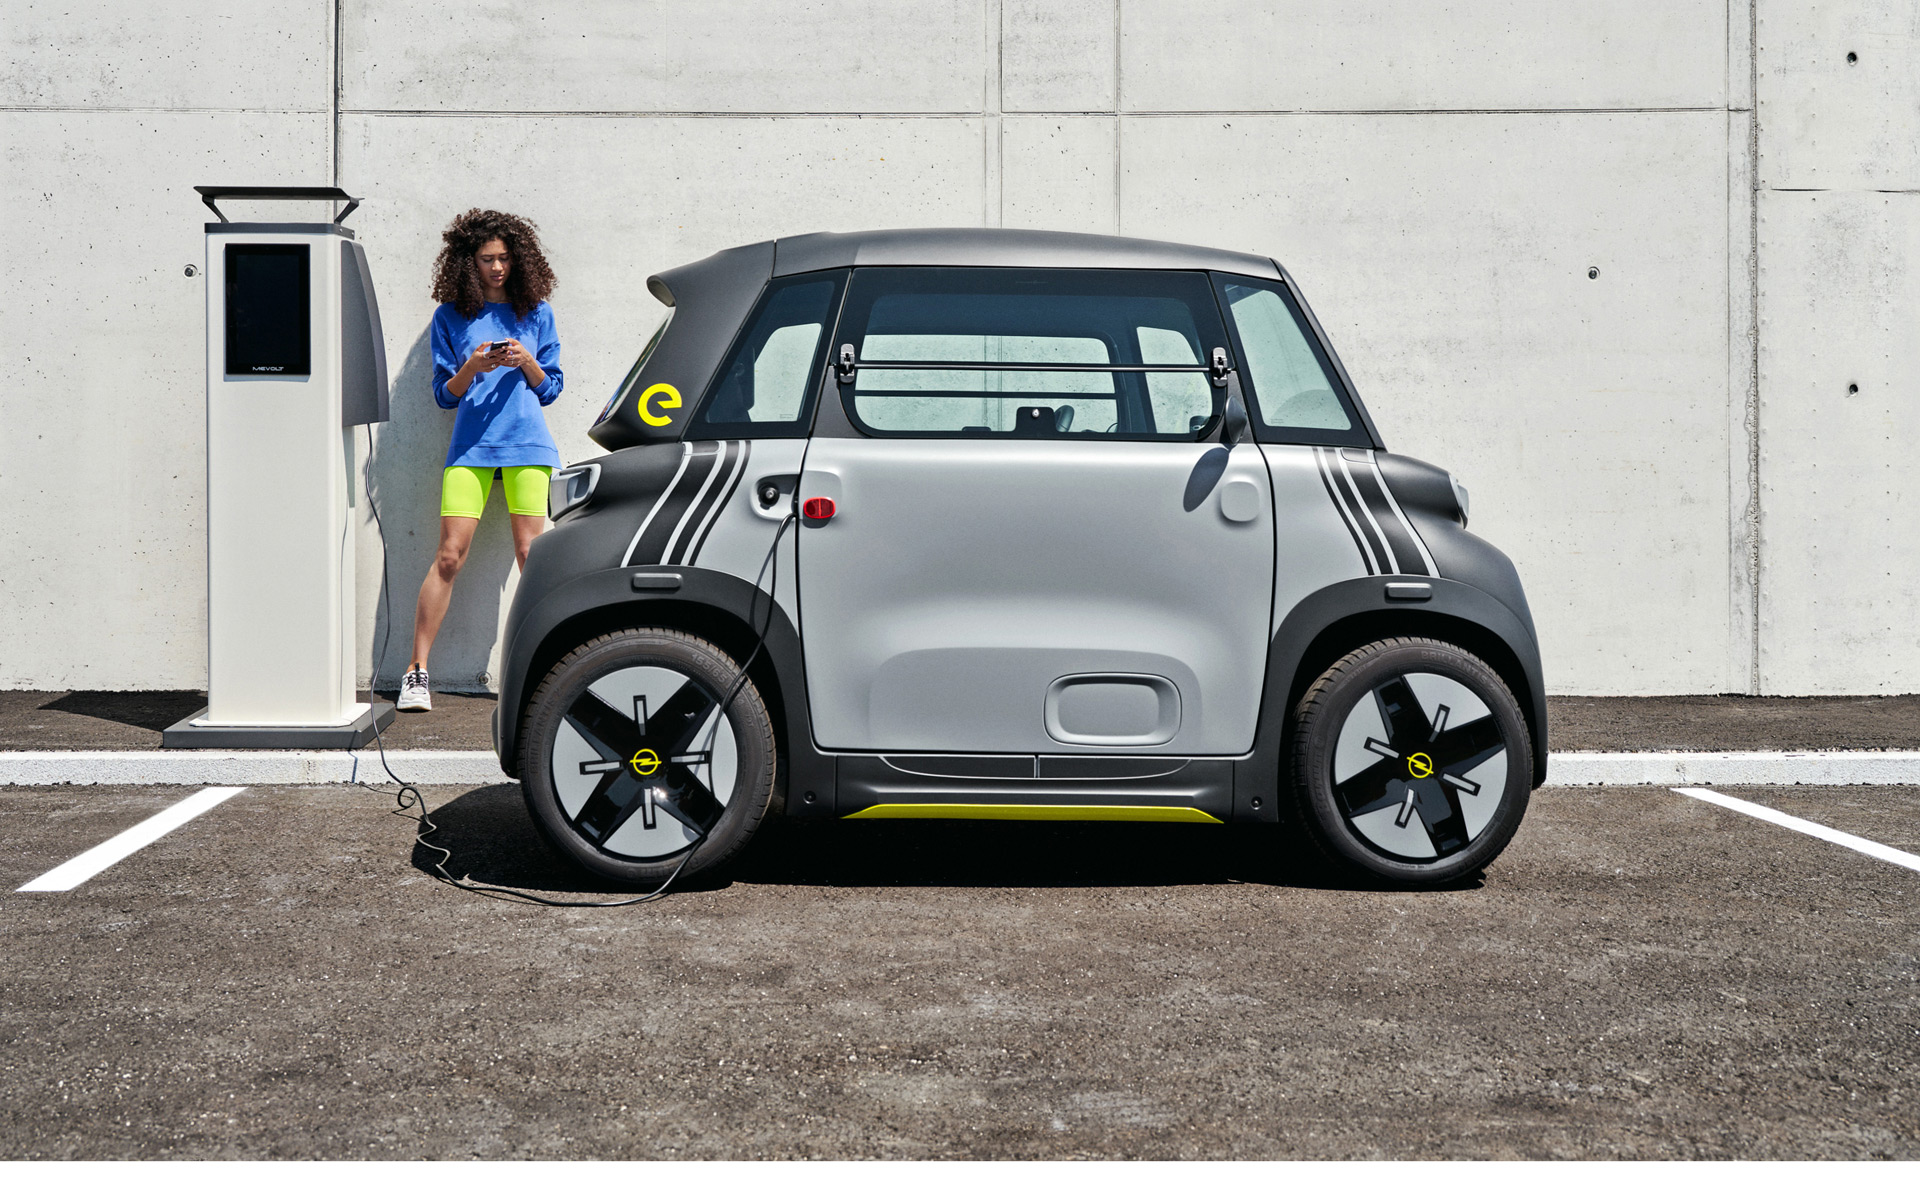 Tiny Citroen Ami electric car to be sold by Opel as the Rockse